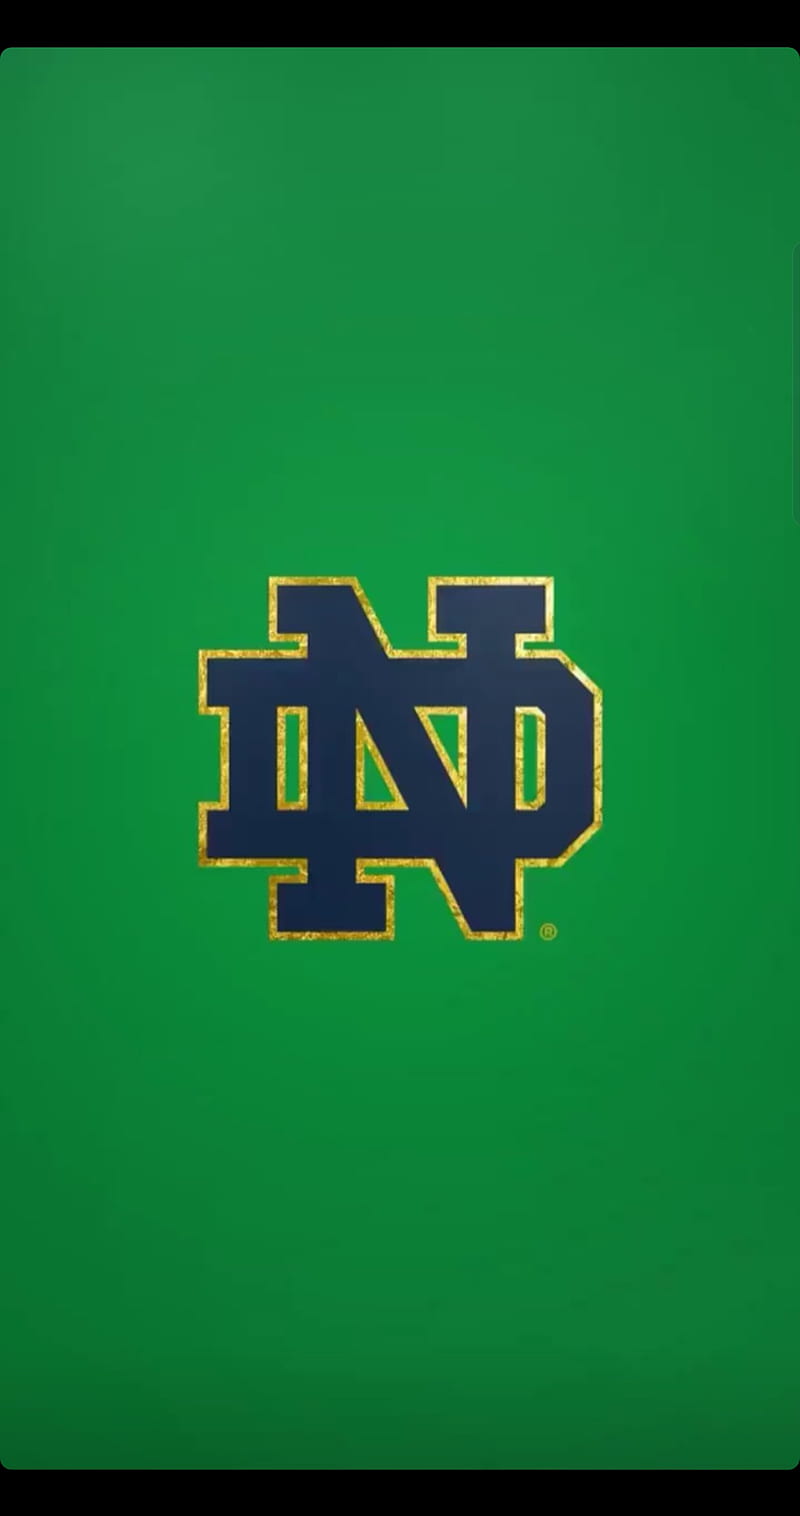 Download The Notre Dame Victory March Wallpaper  Wallpaperscom